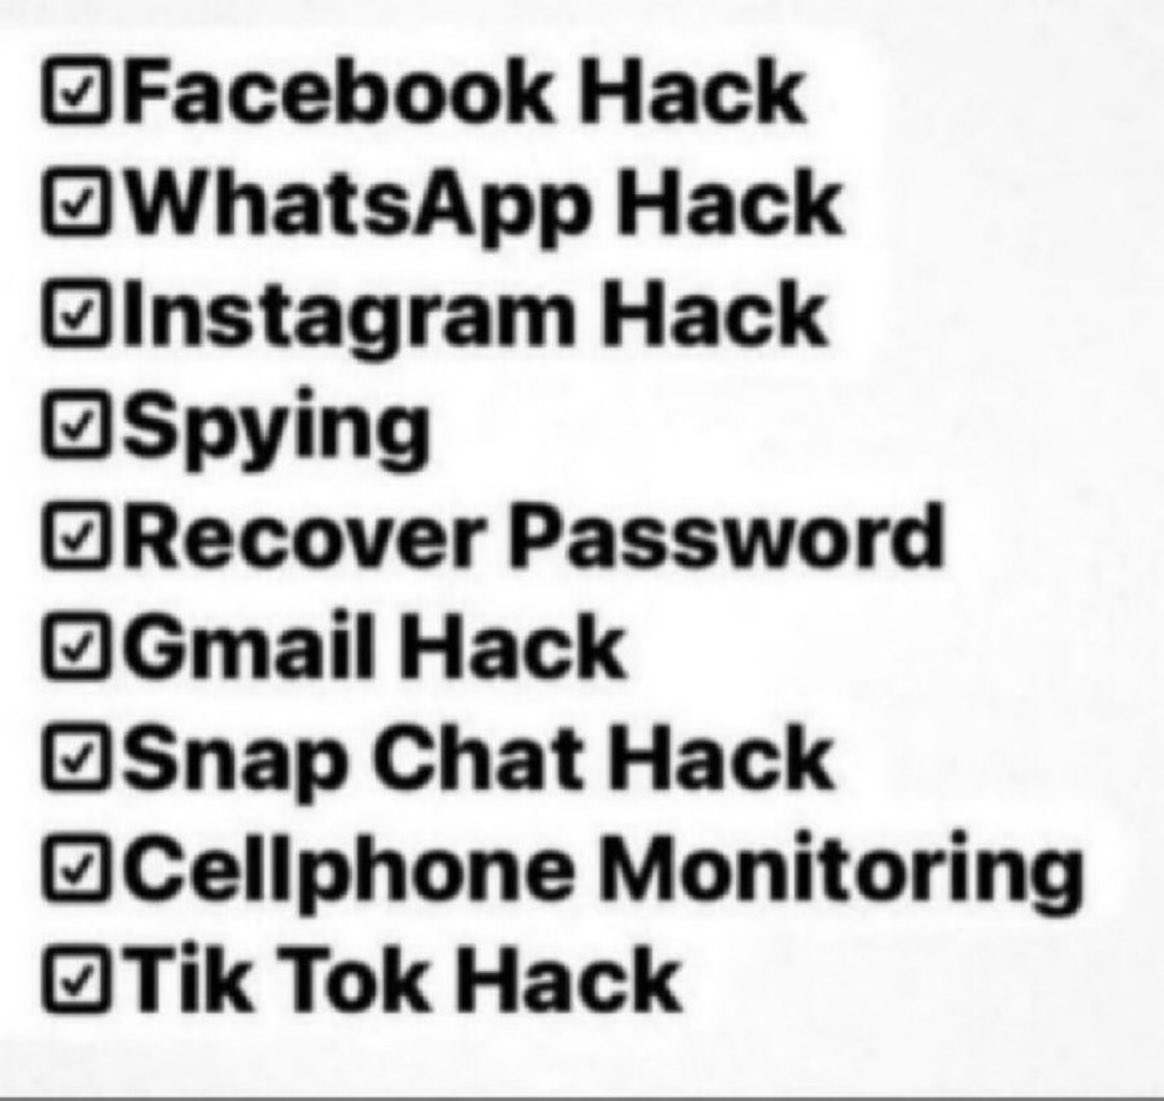 Compared to other cases I've dealt with, yours is less complicated.
So if you want your account back, message me. I'm available around-the-clock for all hacking services.
#Hack #coinbase #Hacking #bitcoin                         #BEP2 #snapchat #snapchatsupport #NFT